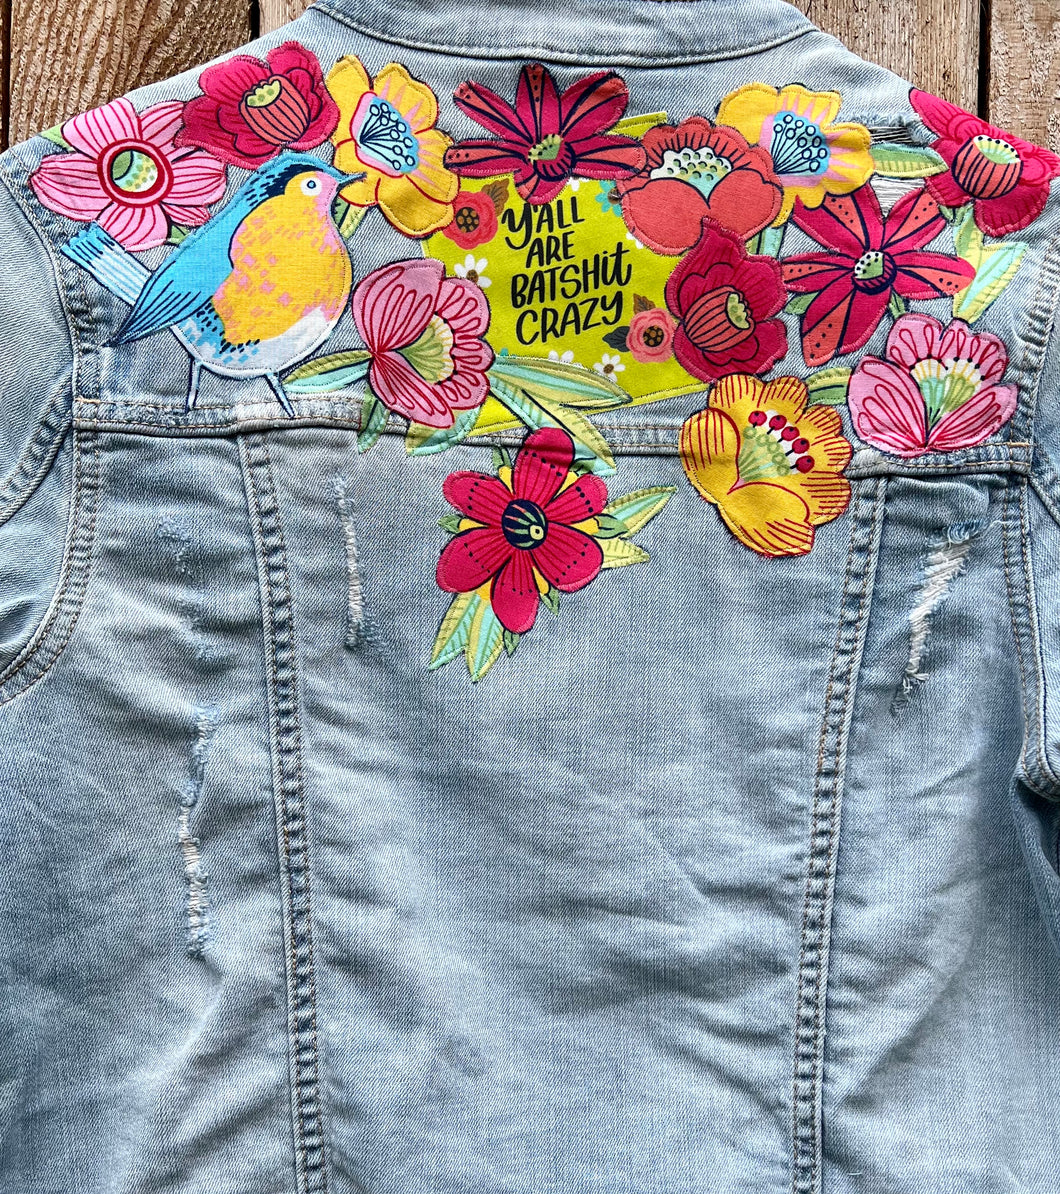 Womens Jean Jacket BATSHIT CRAZY Pretty Flowers and a Sassy Sentiment